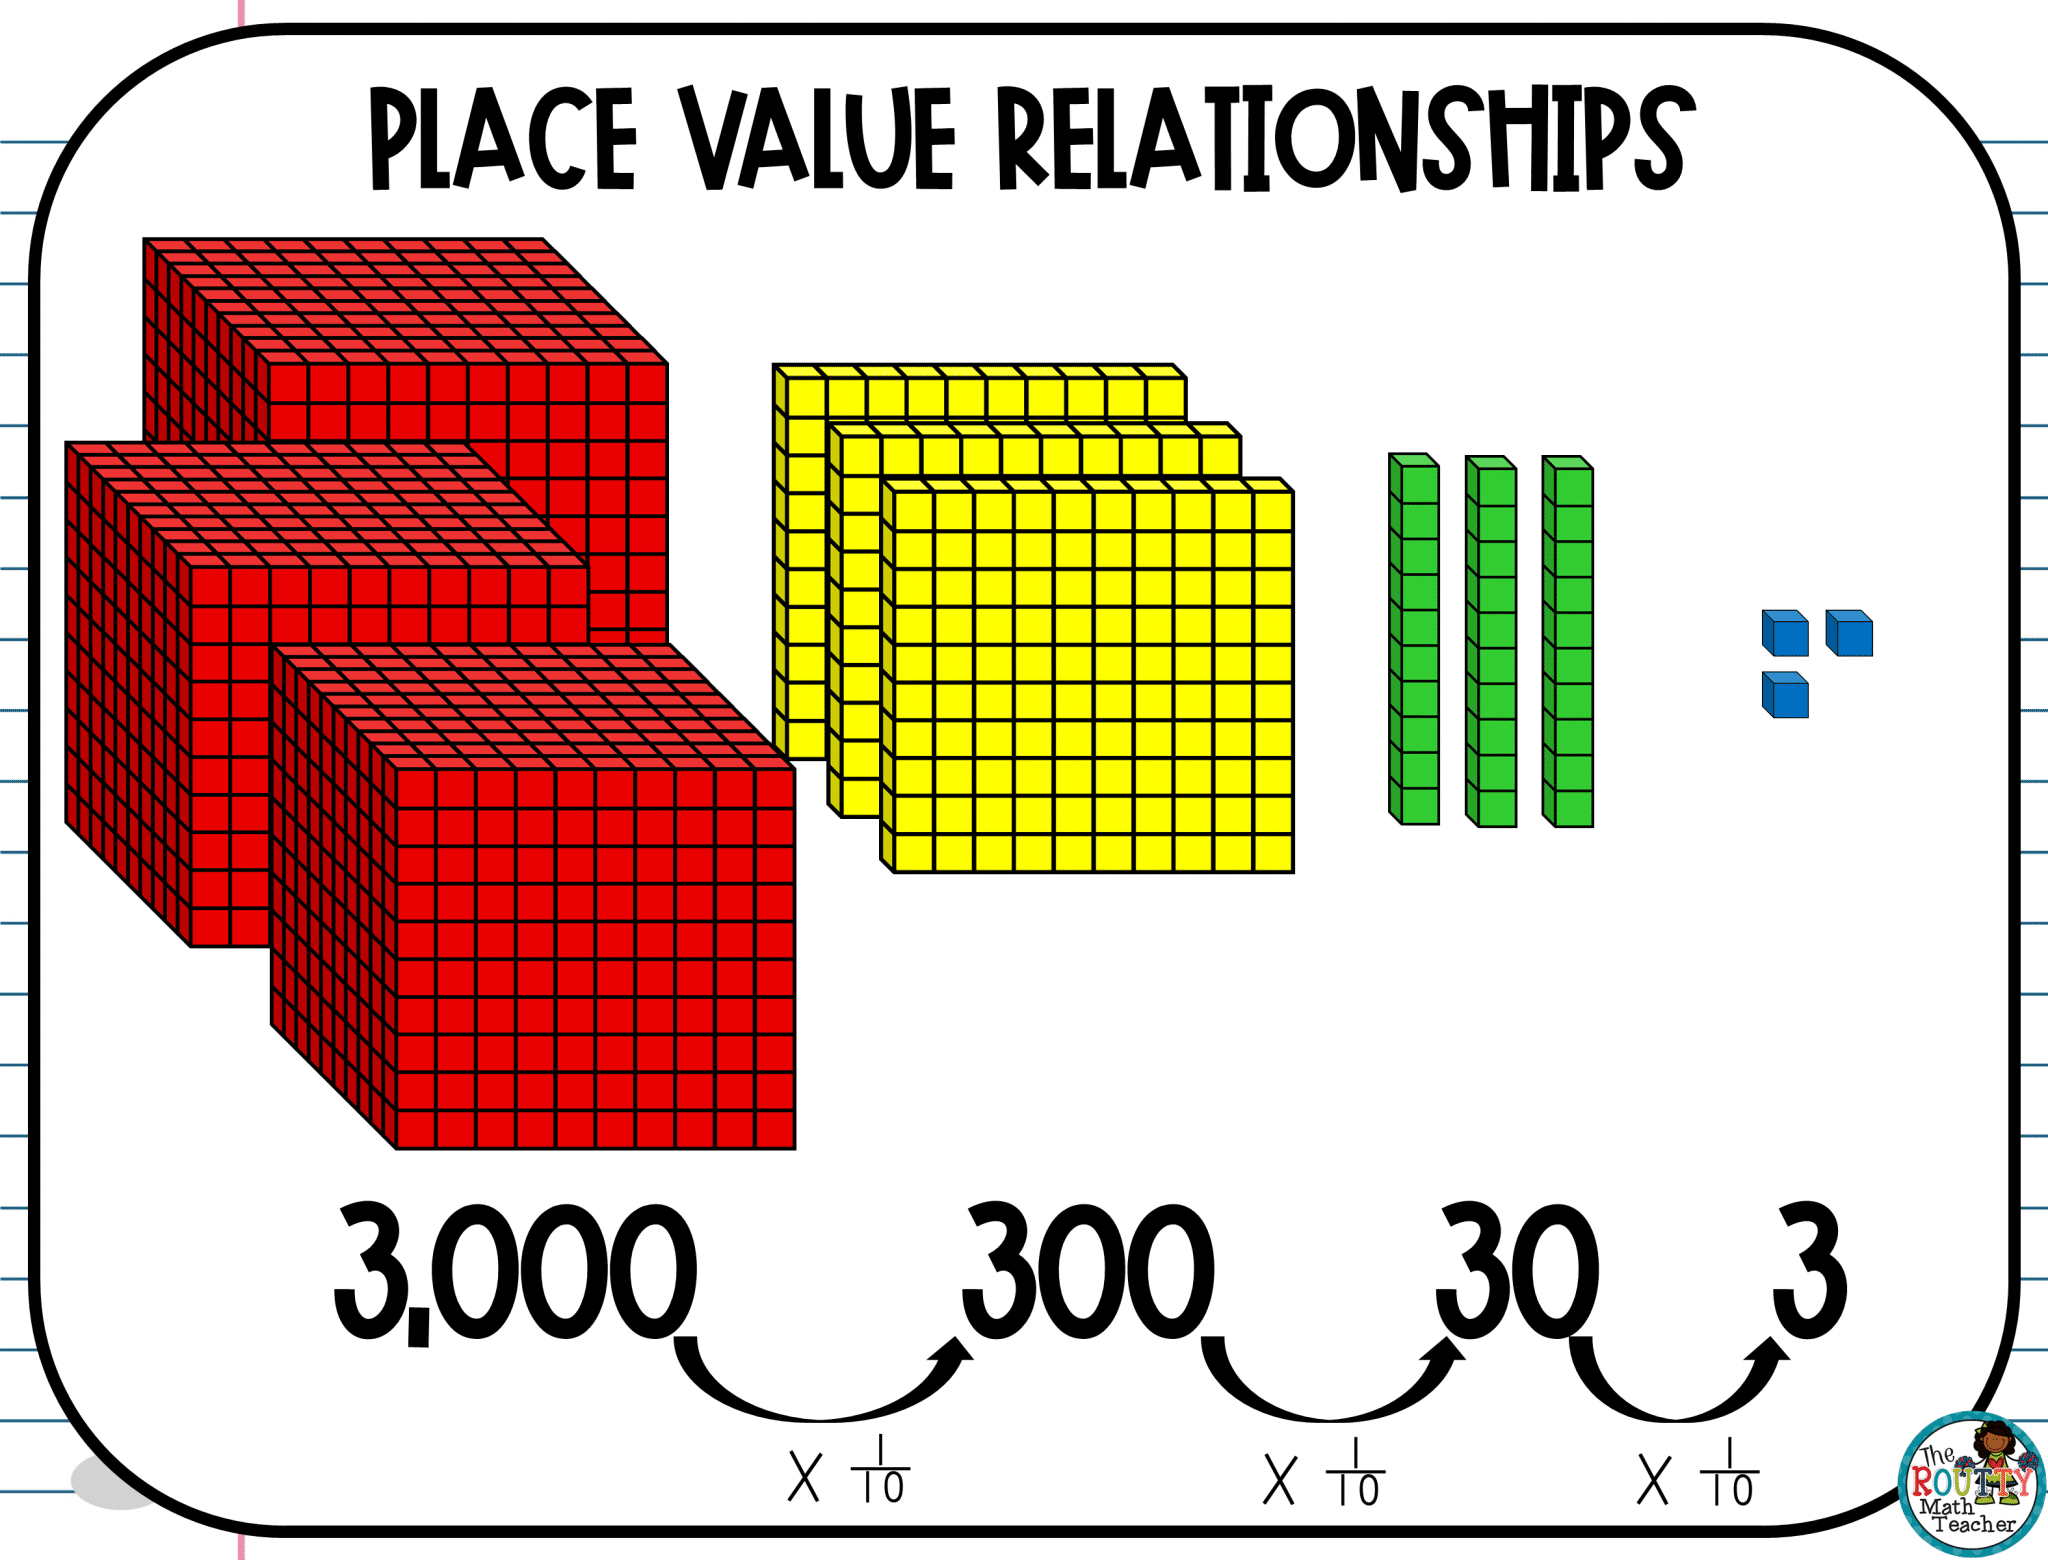 Place Value Relationships The Routty Math Teacher